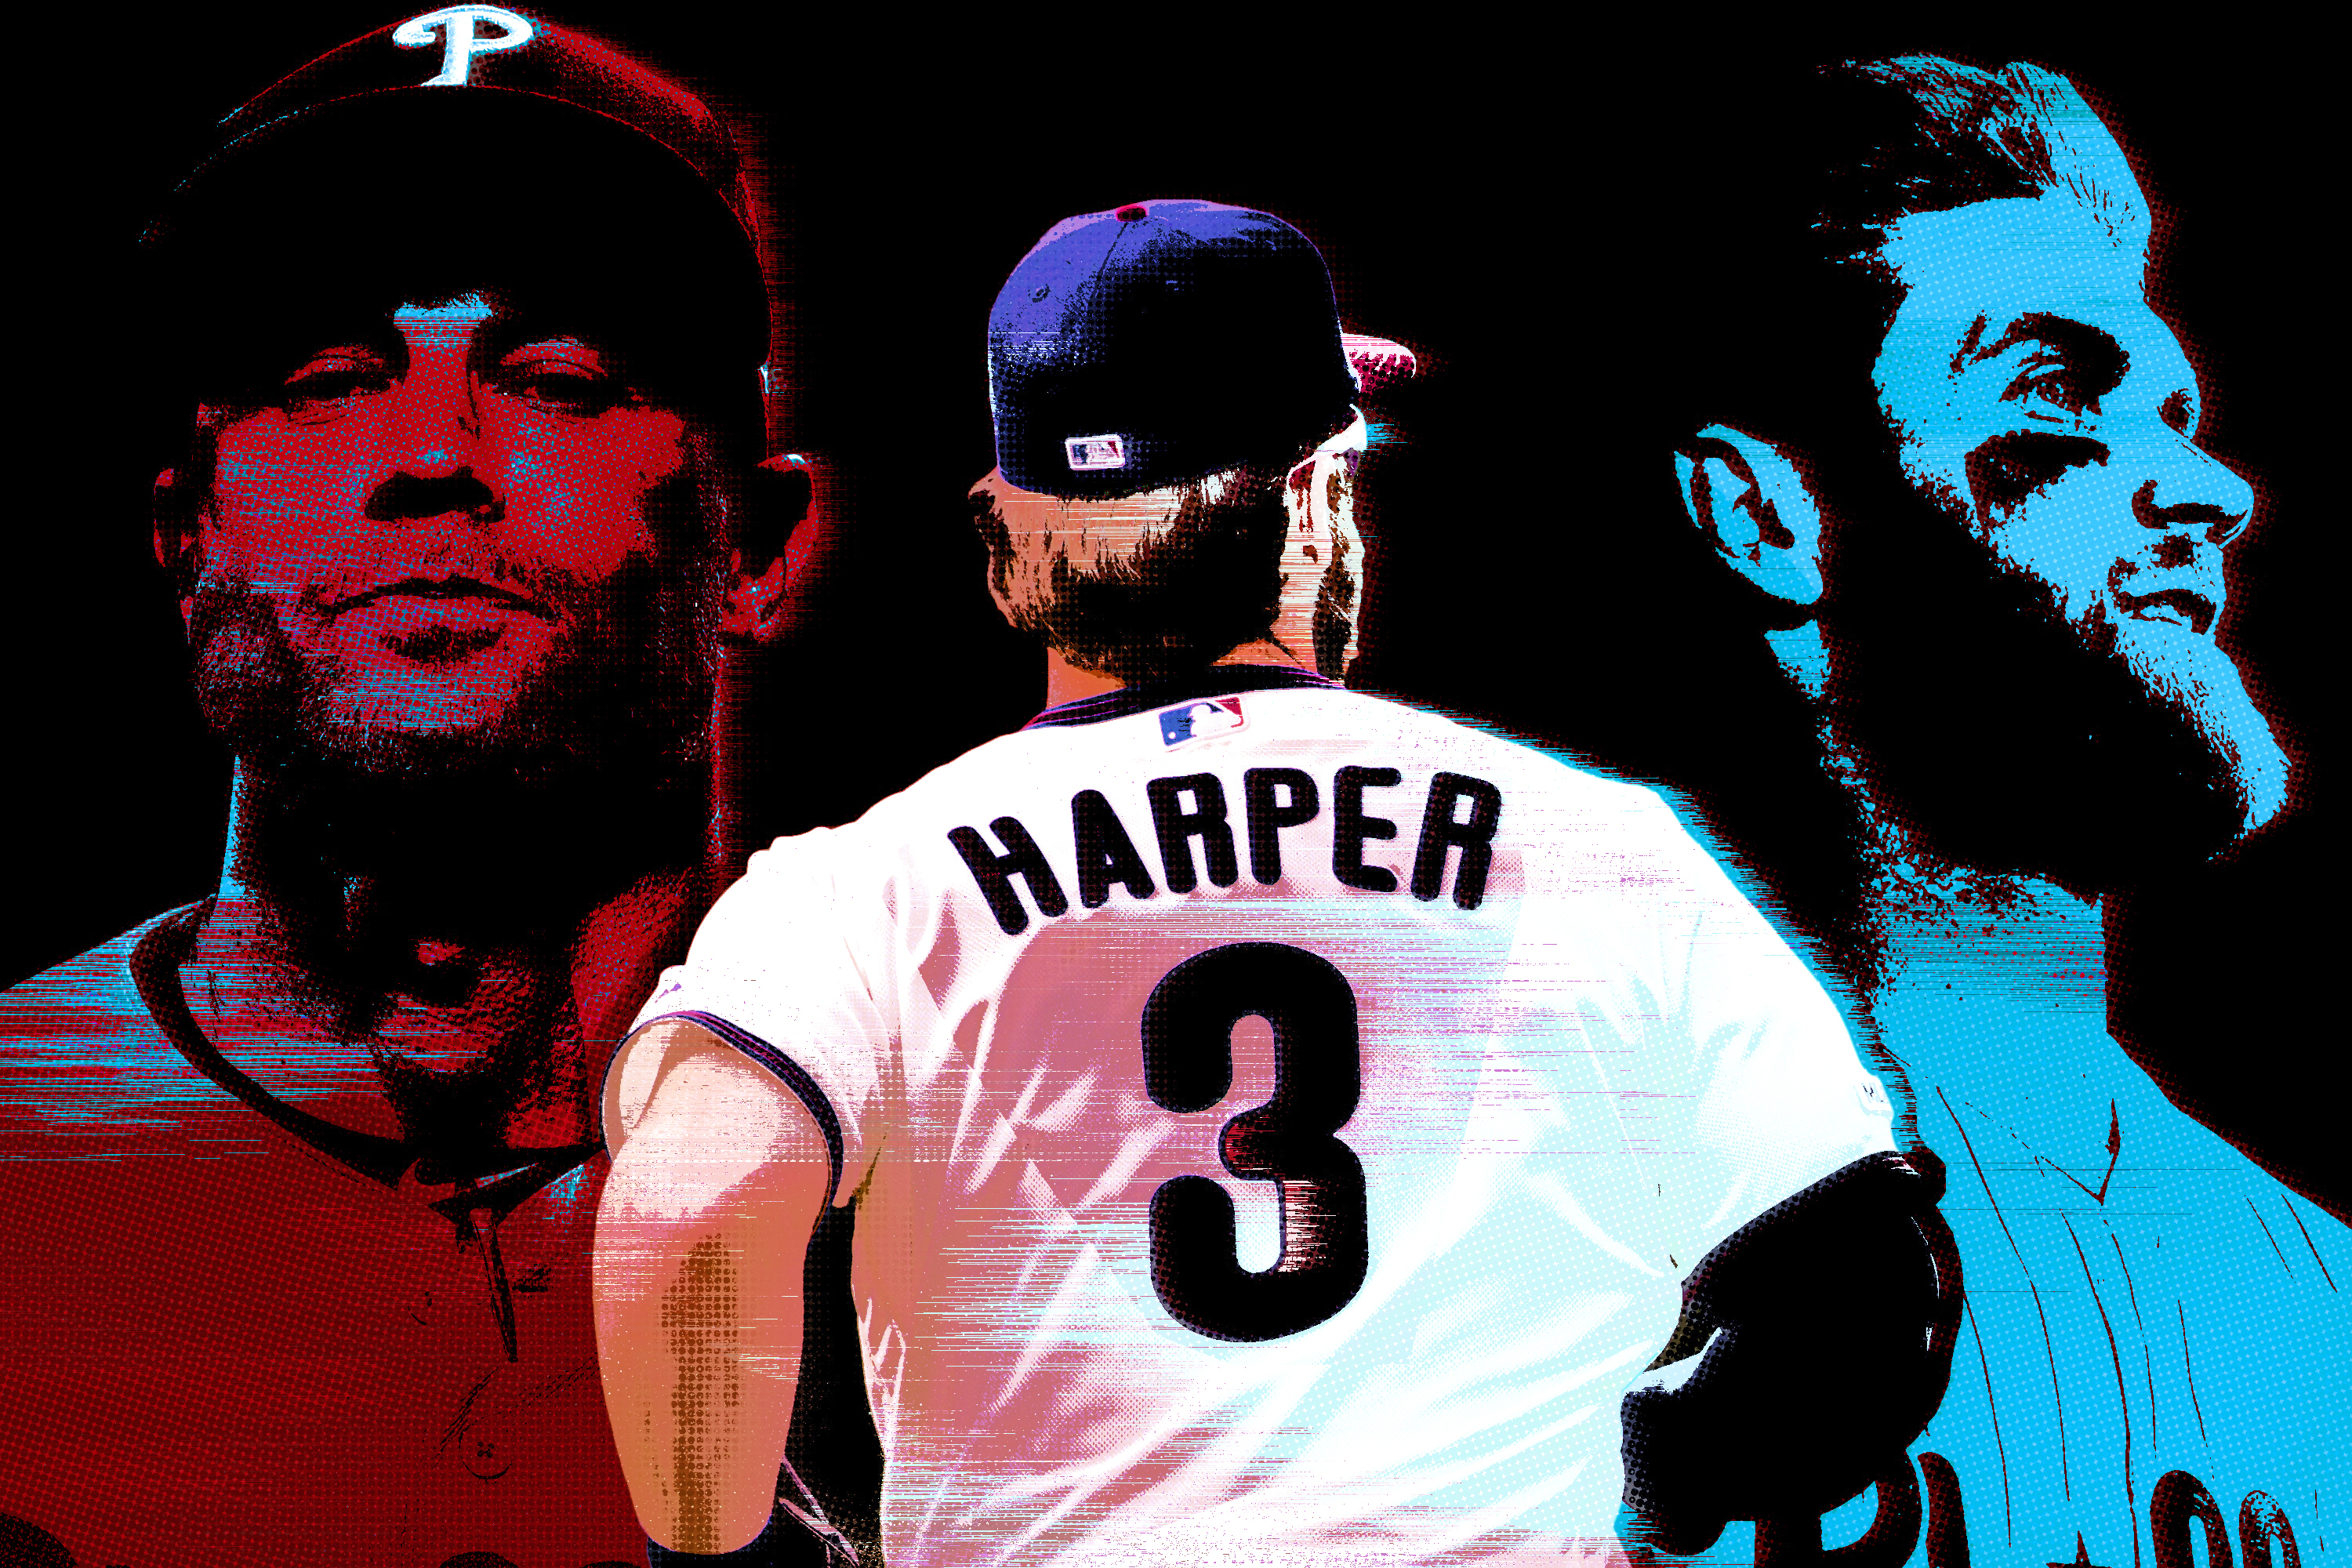 Just a reminder: Bryce Harper still has a chance to be the greatest player  in baseball history